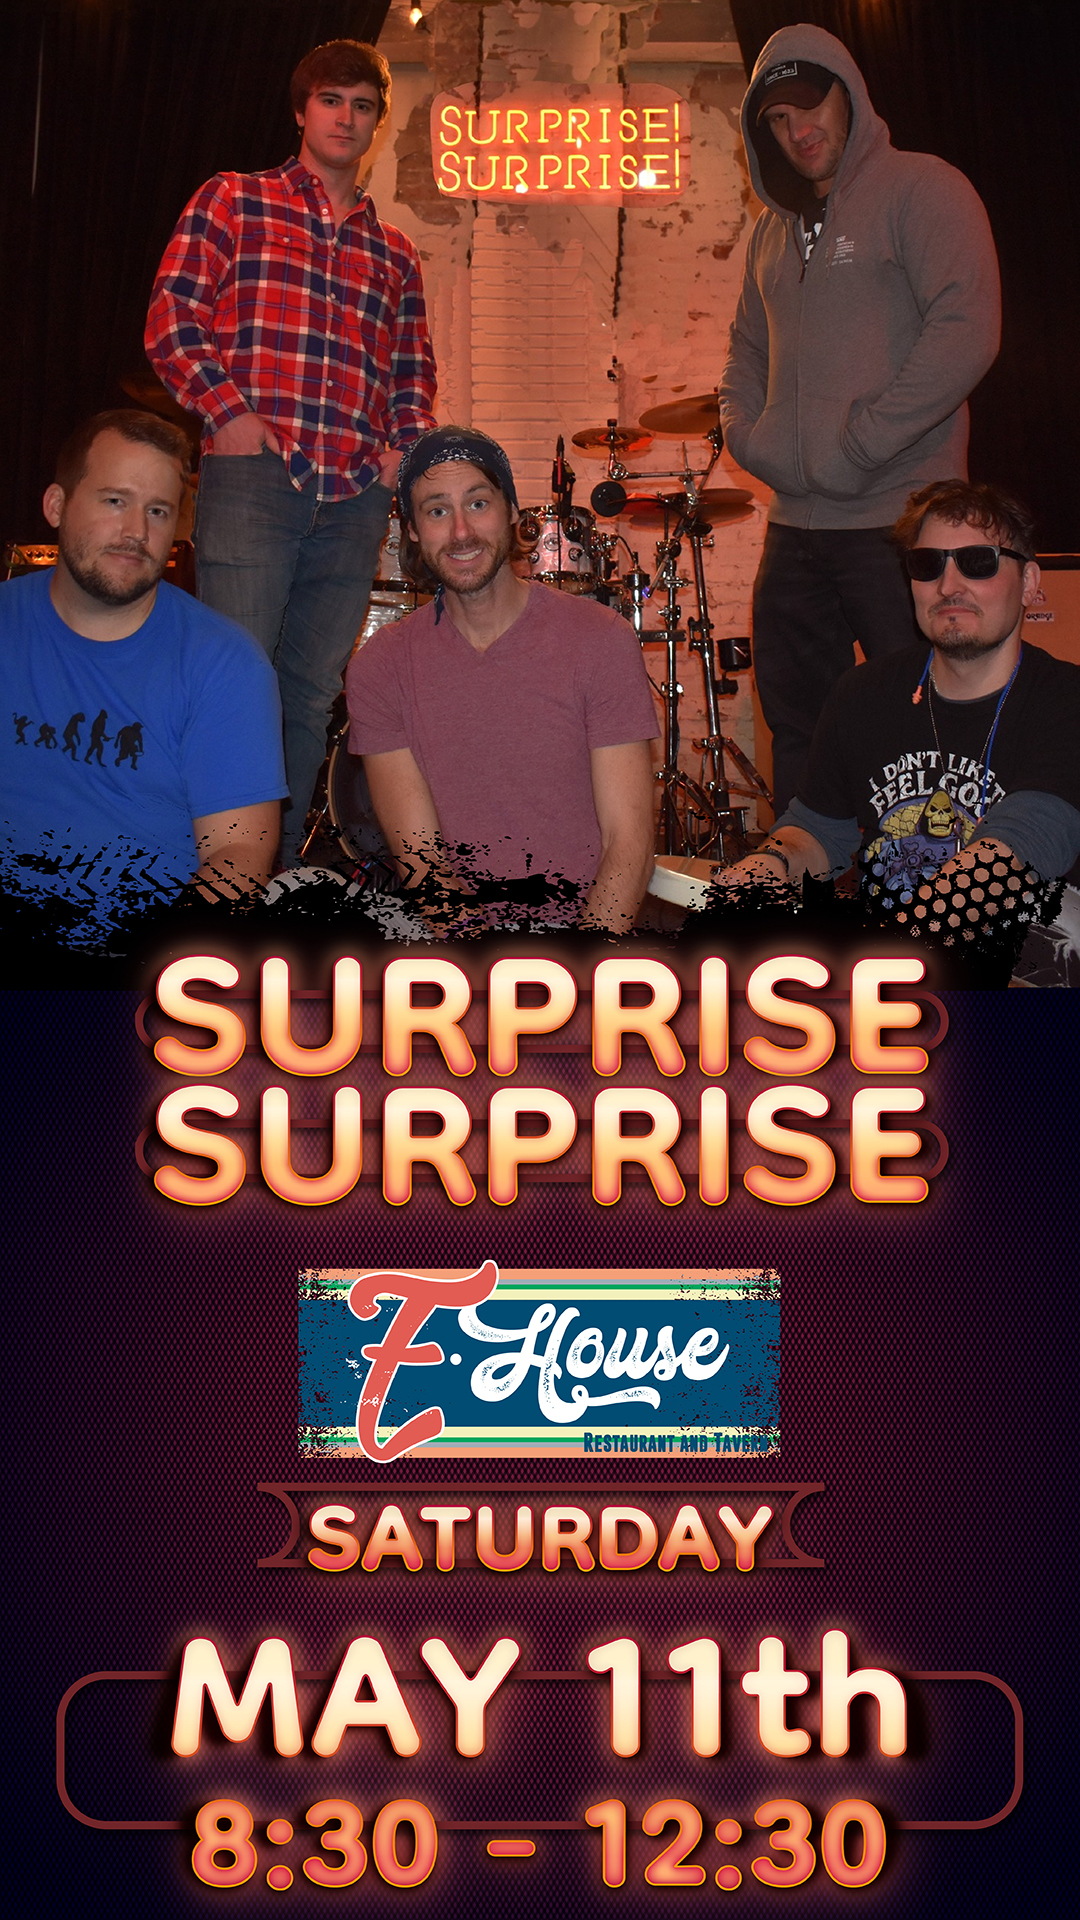 Band members posing for a promotional poster of their "surprise surprise" event at z-house on may 11th, from 8:30 pm to 12:30 am.